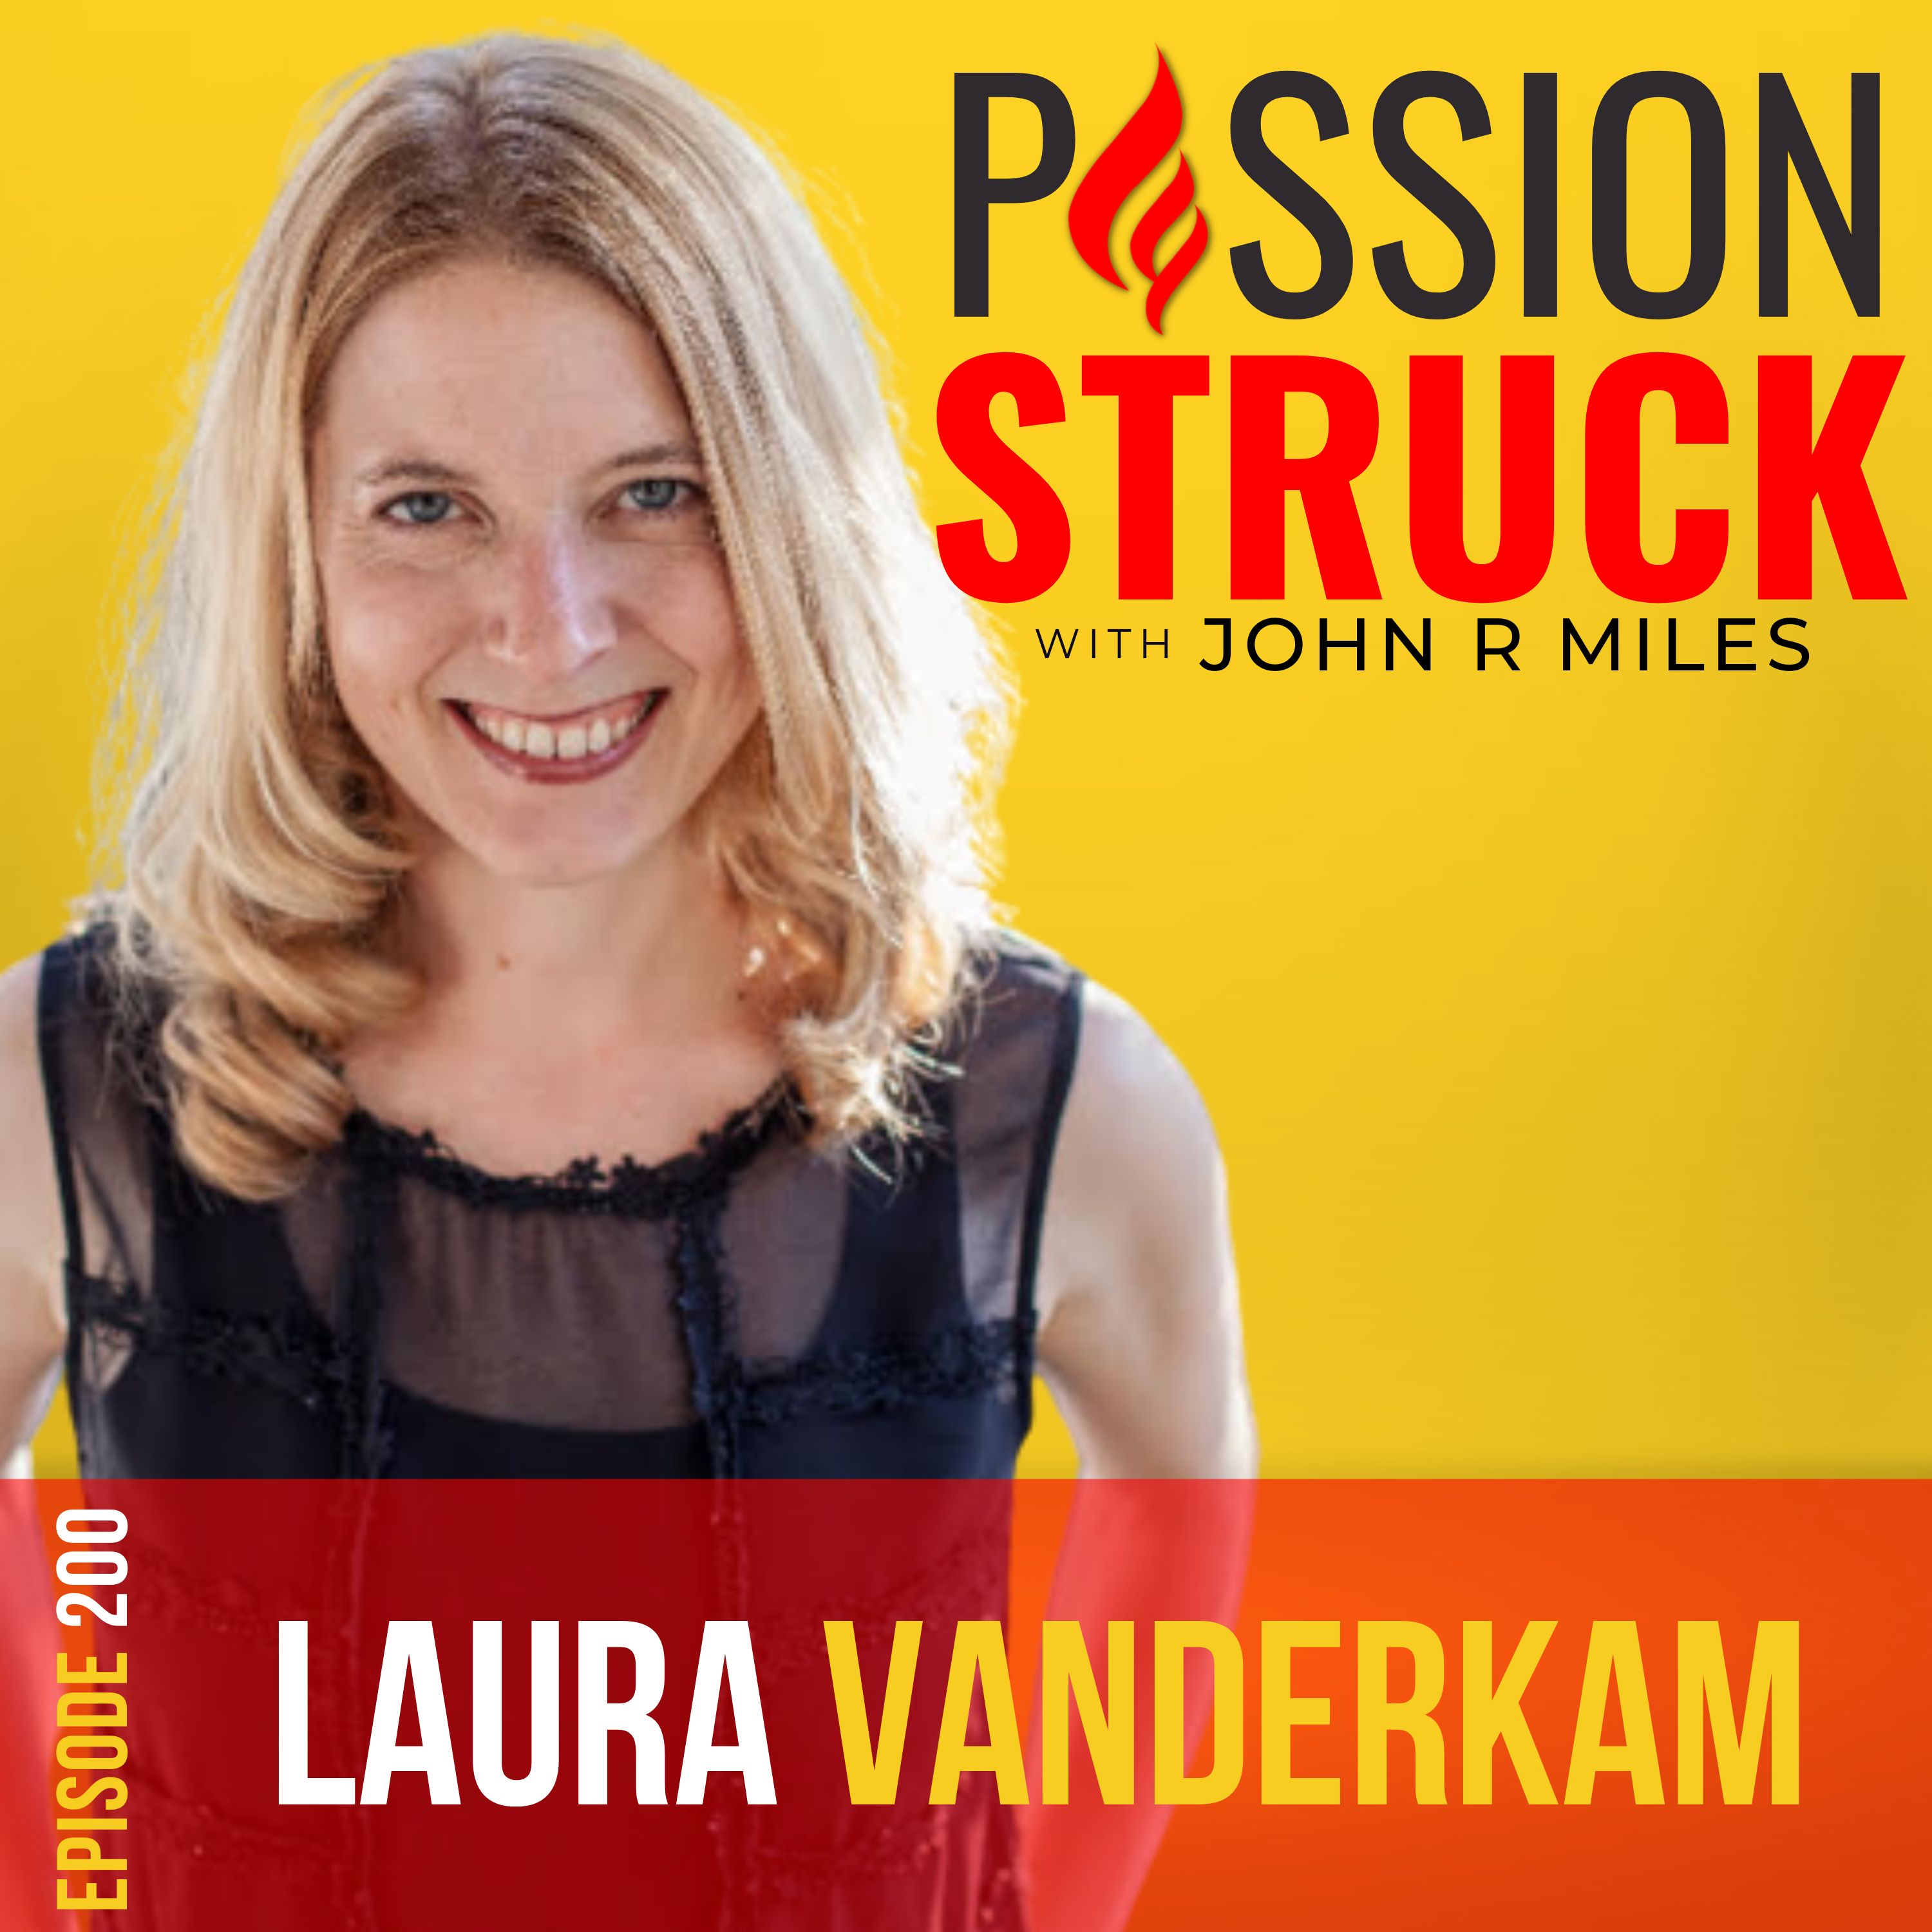 Passion Struck with John R. Miles episode 200 with Laura Vanderkam on make time for what matters